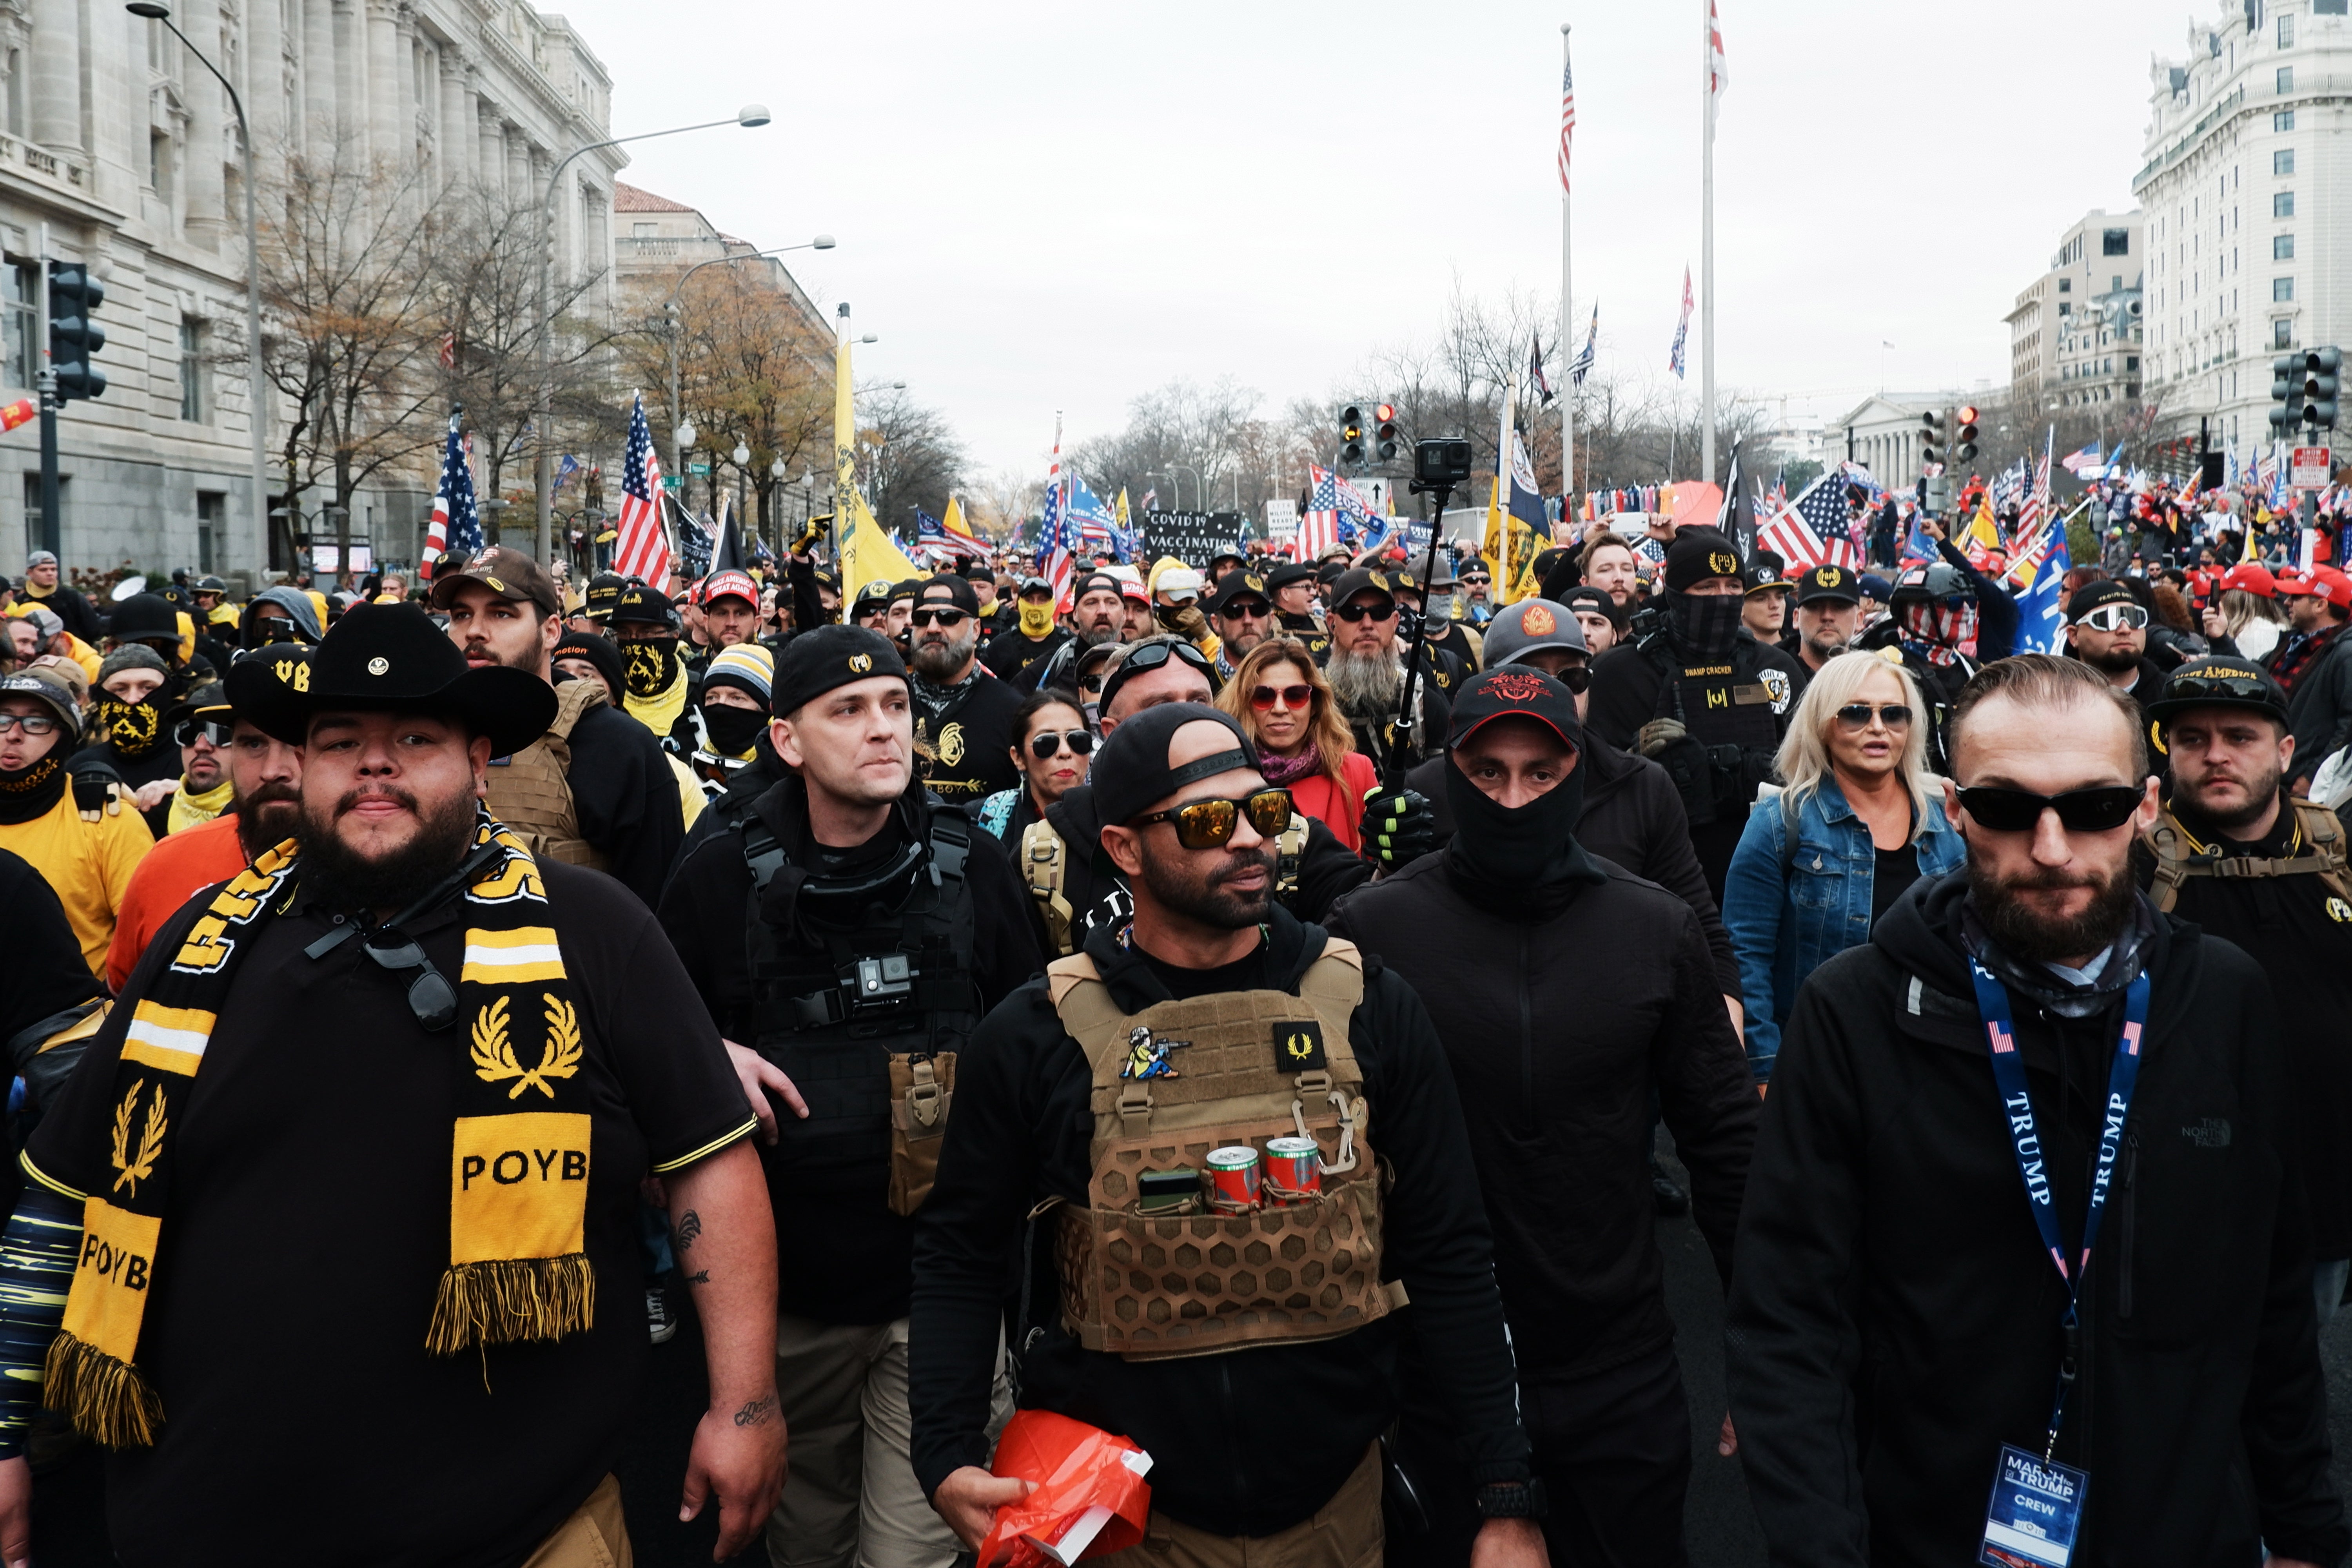 Proud boys at the Million MAGA March in Washington DC